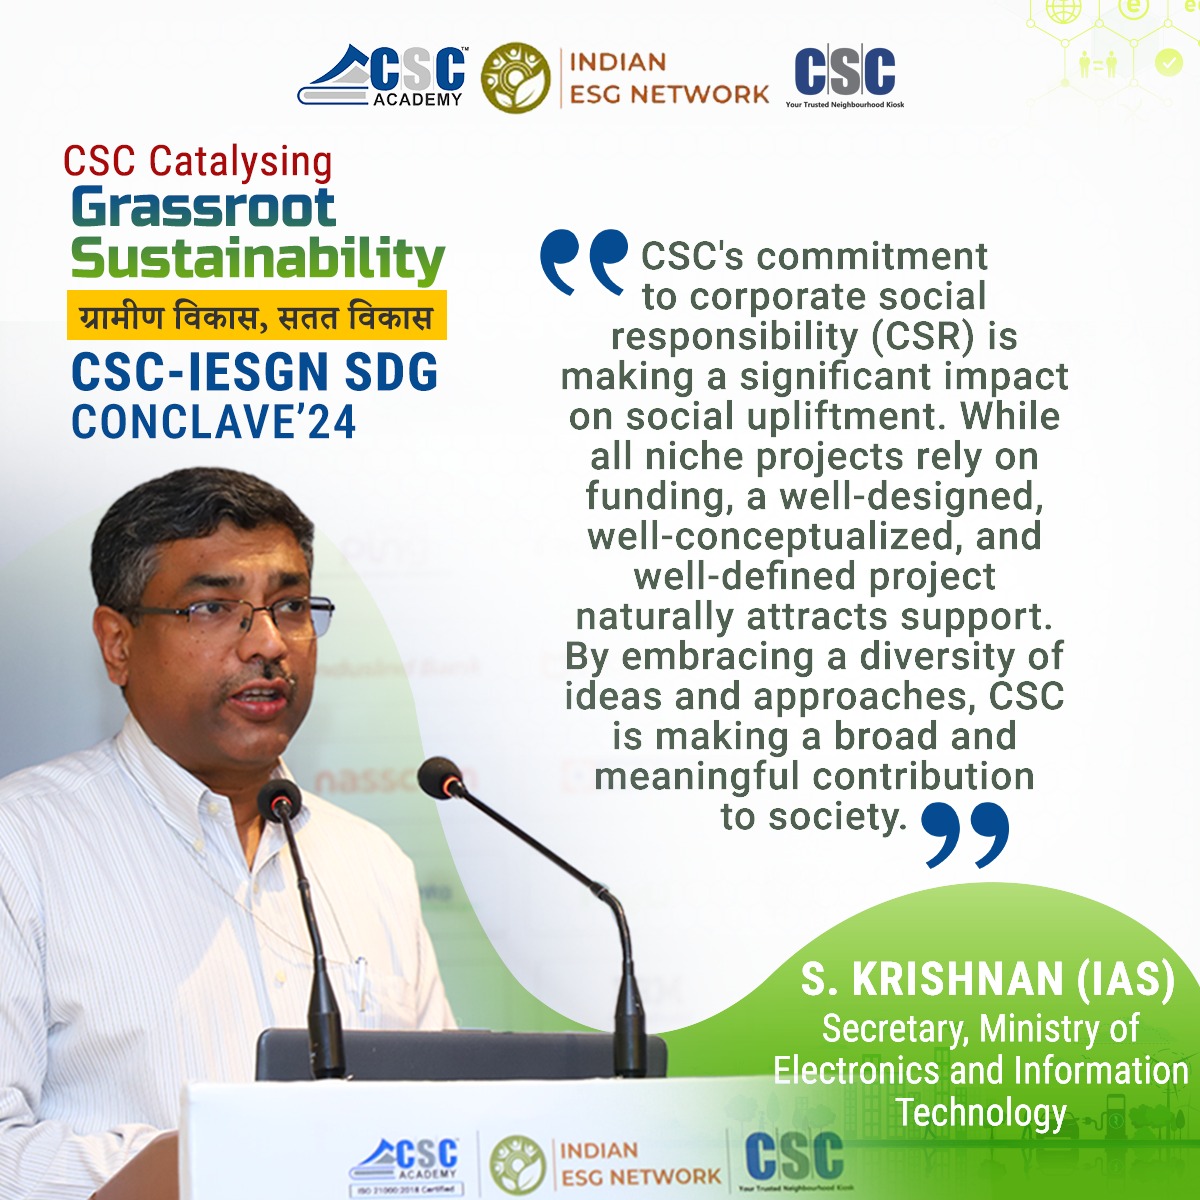 '#CSC's commitment to CSR is significantly impacting social upliftment by embracing a diversity of ideas. Well-designed, well-conceptualized, and well-defined project naturally attracts support.'- S. Krishnan (IAS), Secretary, #MeitY #SDGConclave2024 #SustainableDevelopmentGoals